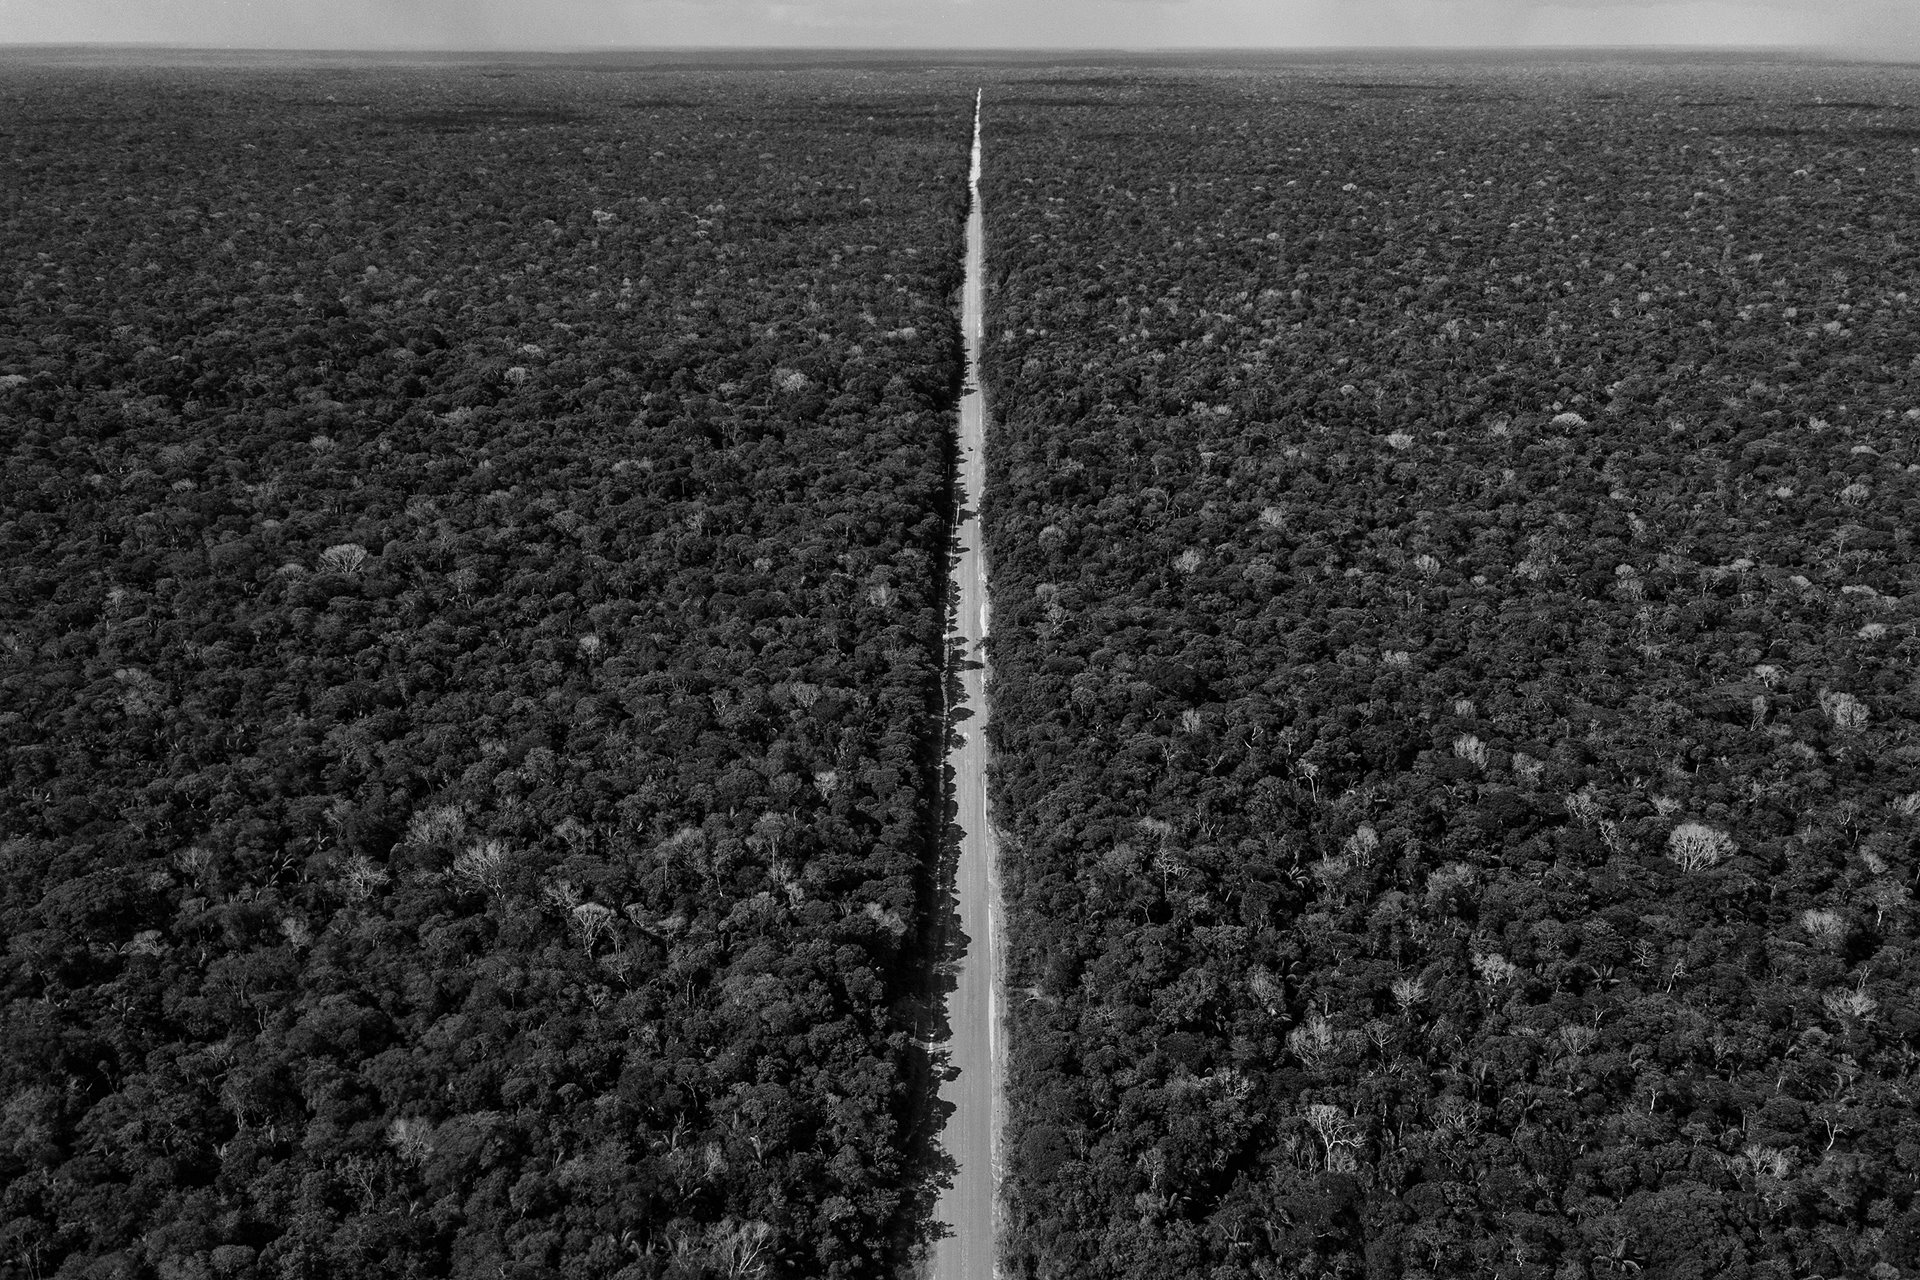 A stretch of the BR-319 road, which connects the cities of Manaus and Porto Velho, near Manicoré, in the Brazilian Amazon. President Jair Bolsonaro promised to repave the 870-kilometer-long road during his 2018 election campaign, a move that could have enormous impact for the region as it would open up large areas of the Amazon to deforesters.